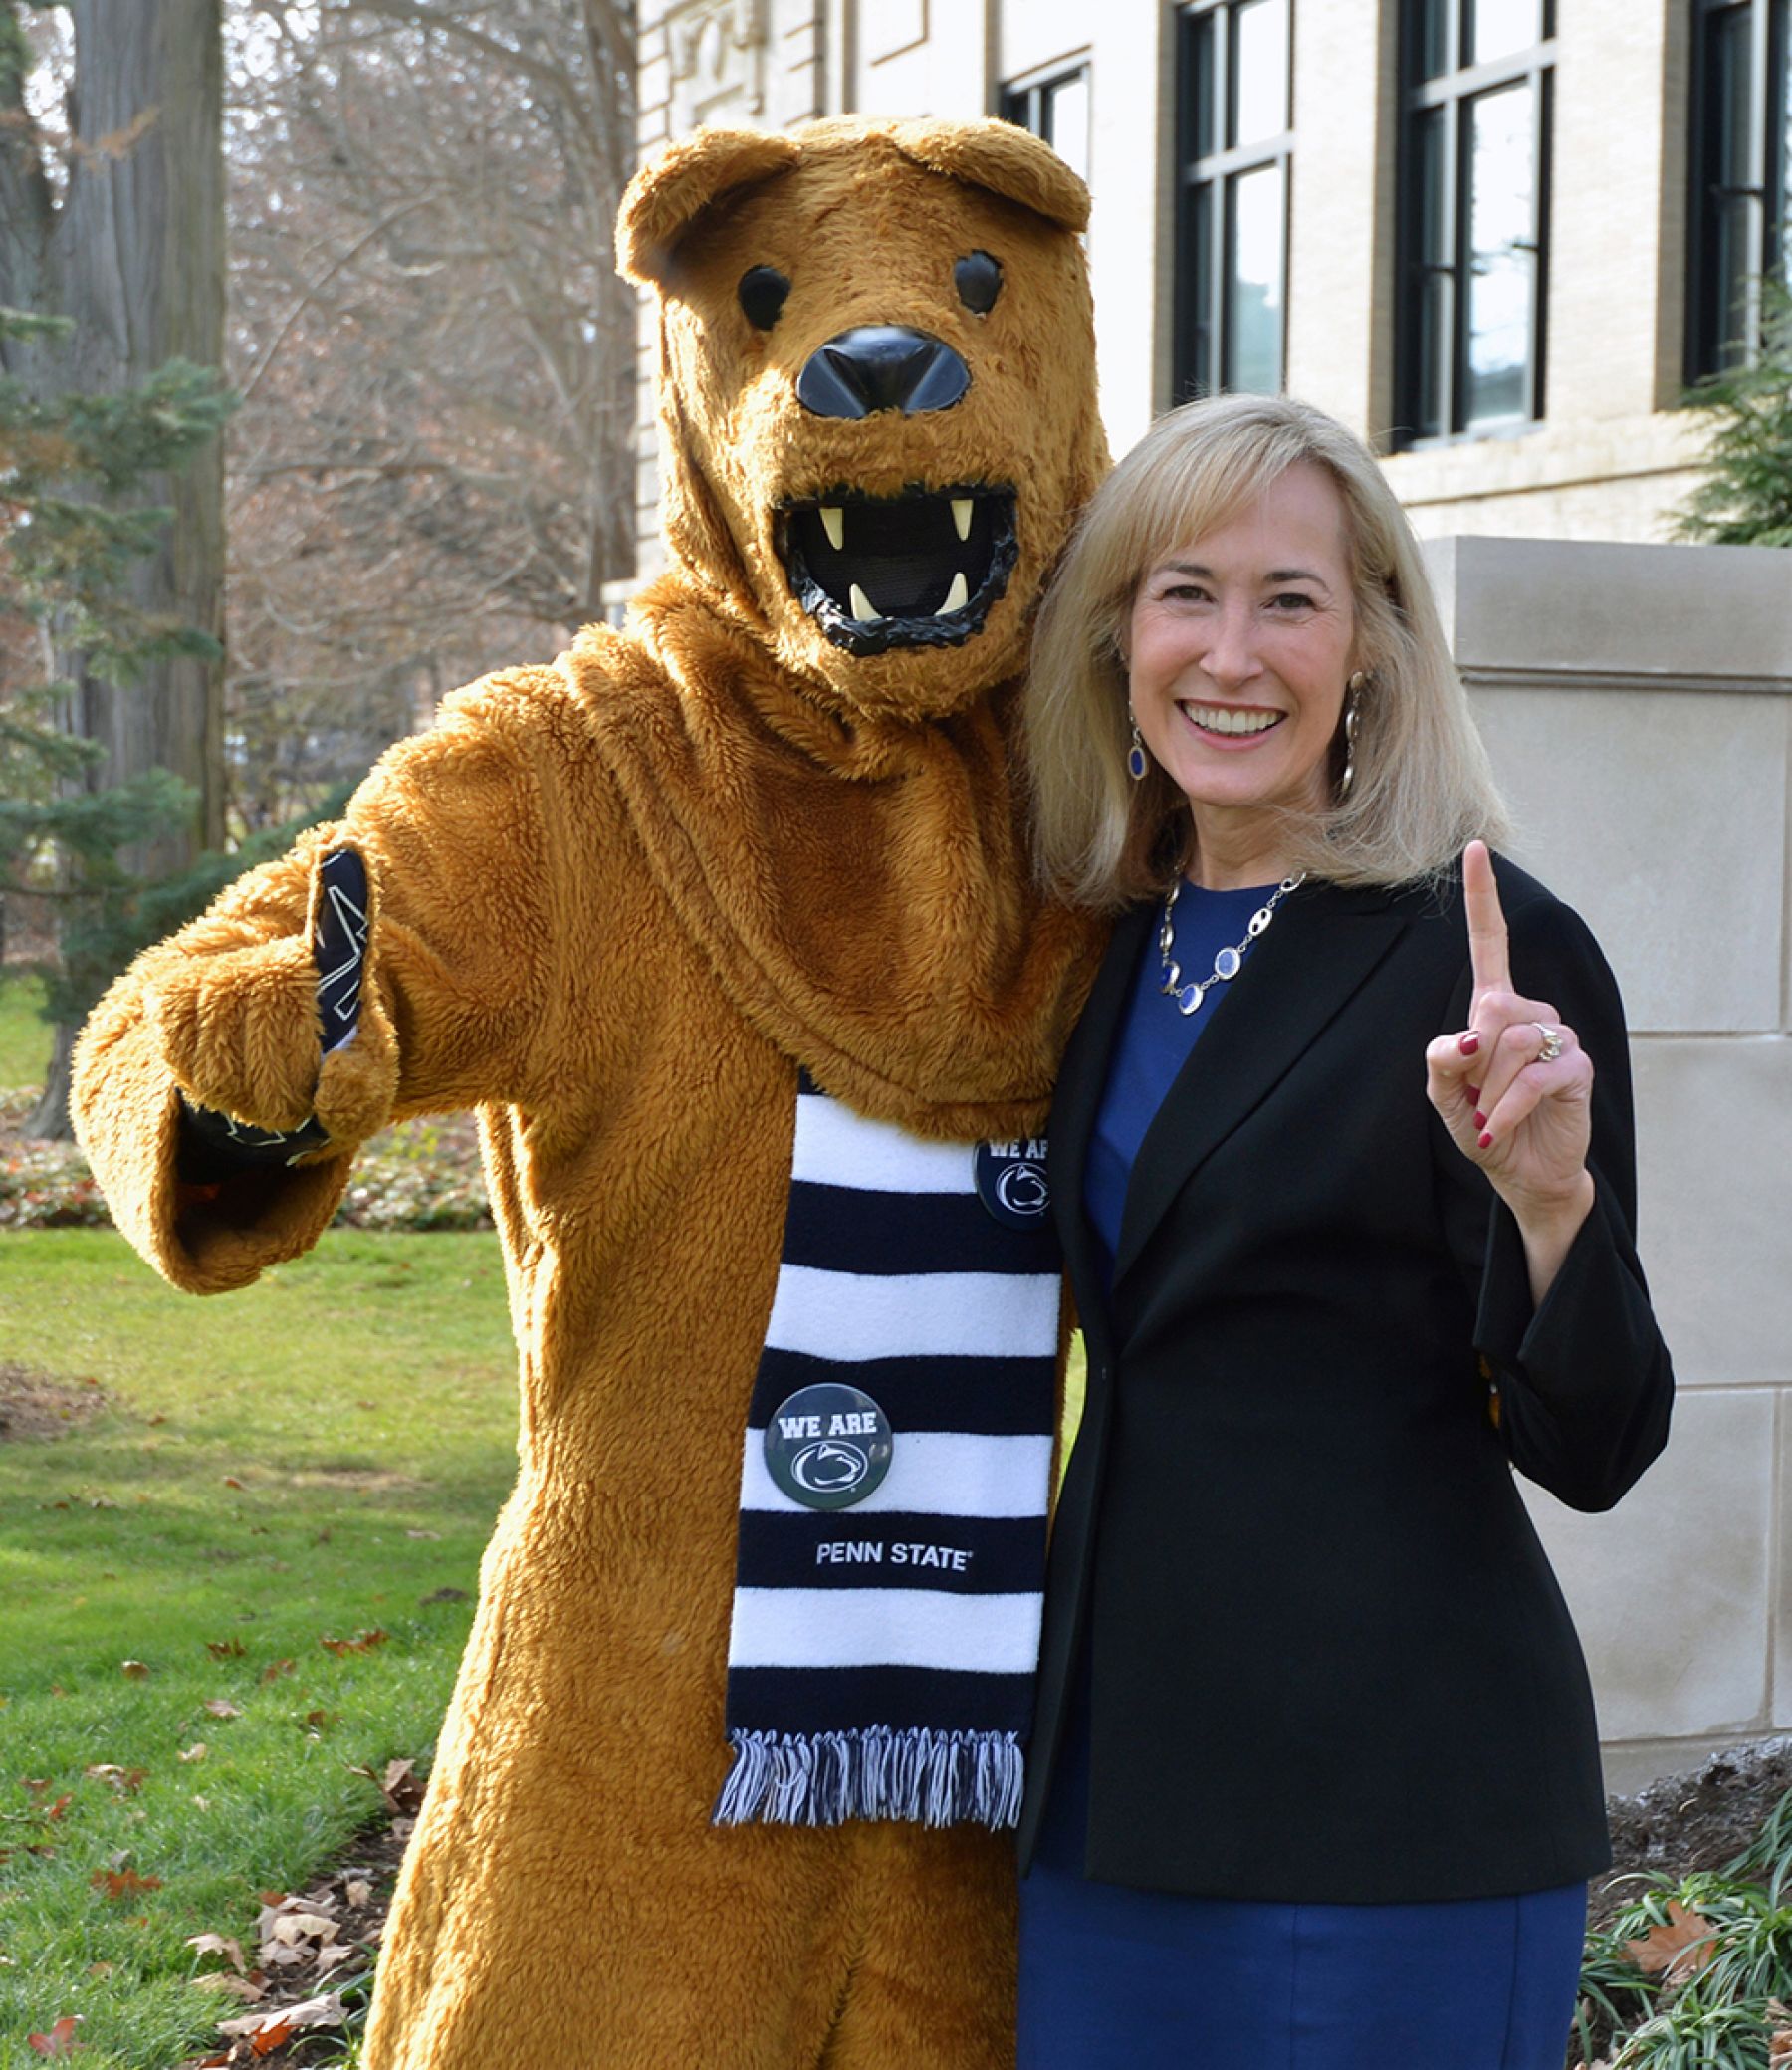 Dean Hardin with the Nittany Lion mascot